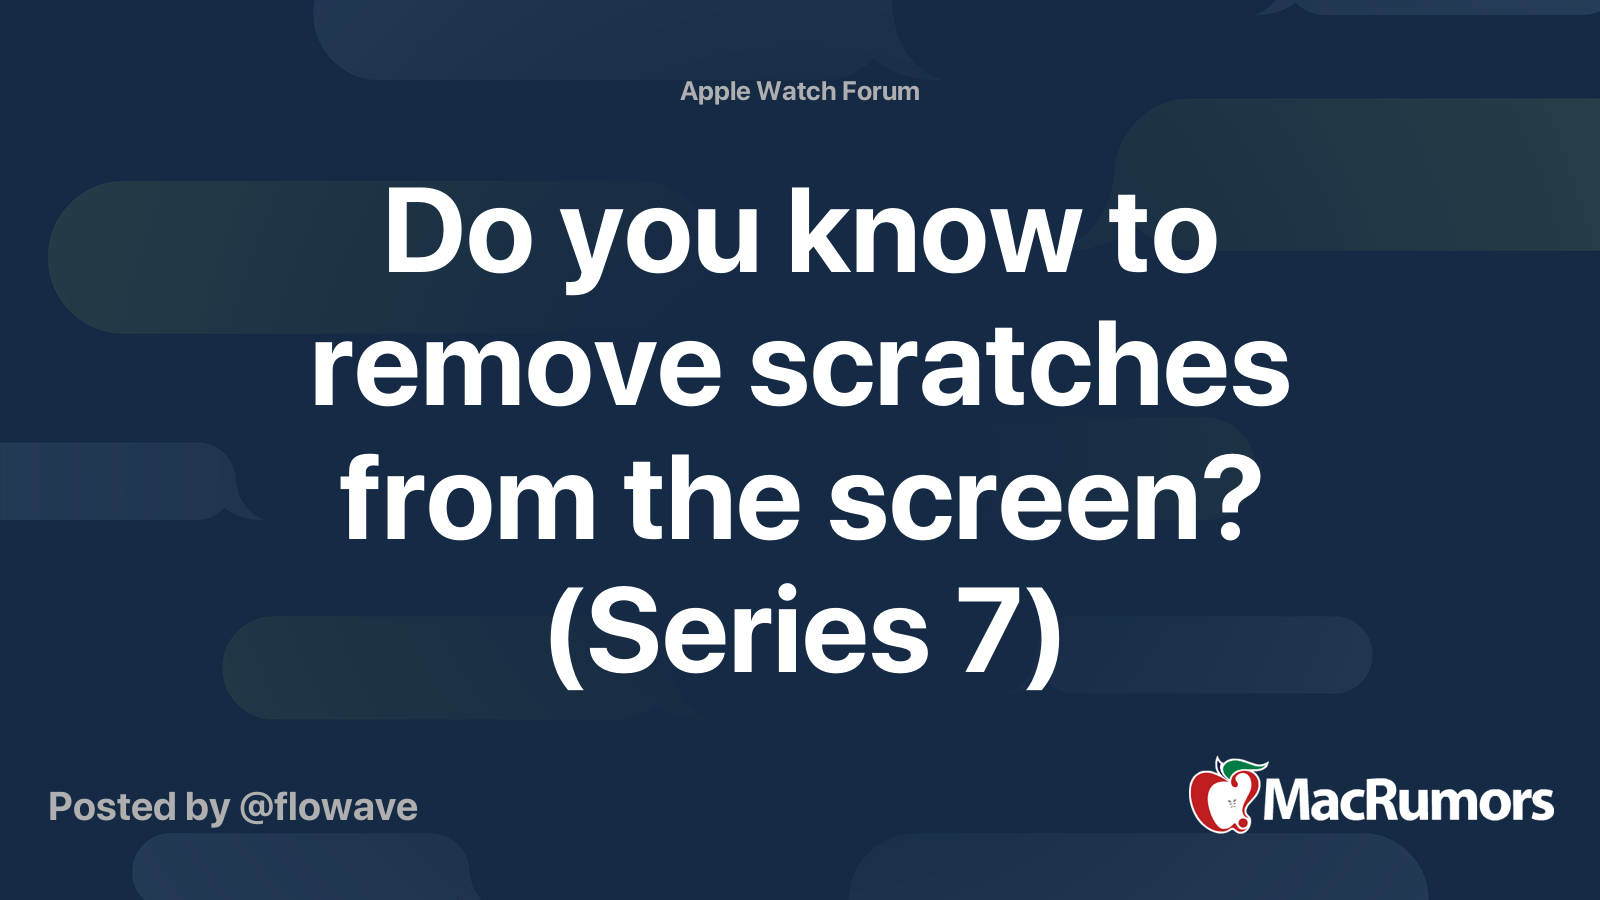 Do you know to remove scratches from the screen? (Series 7